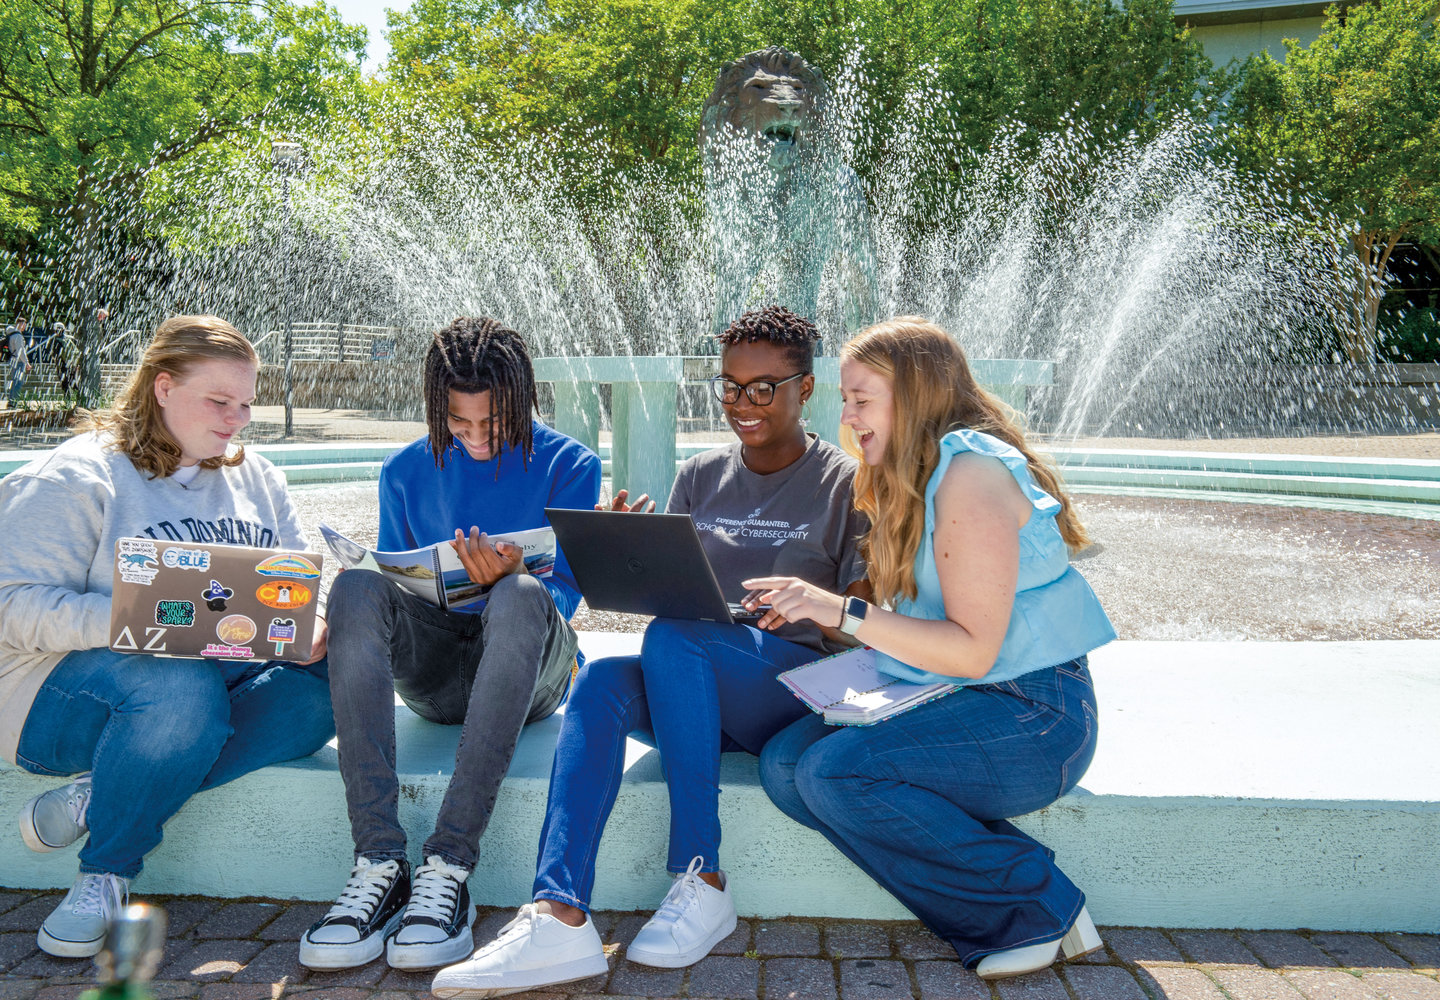 Students Studying by Fountain